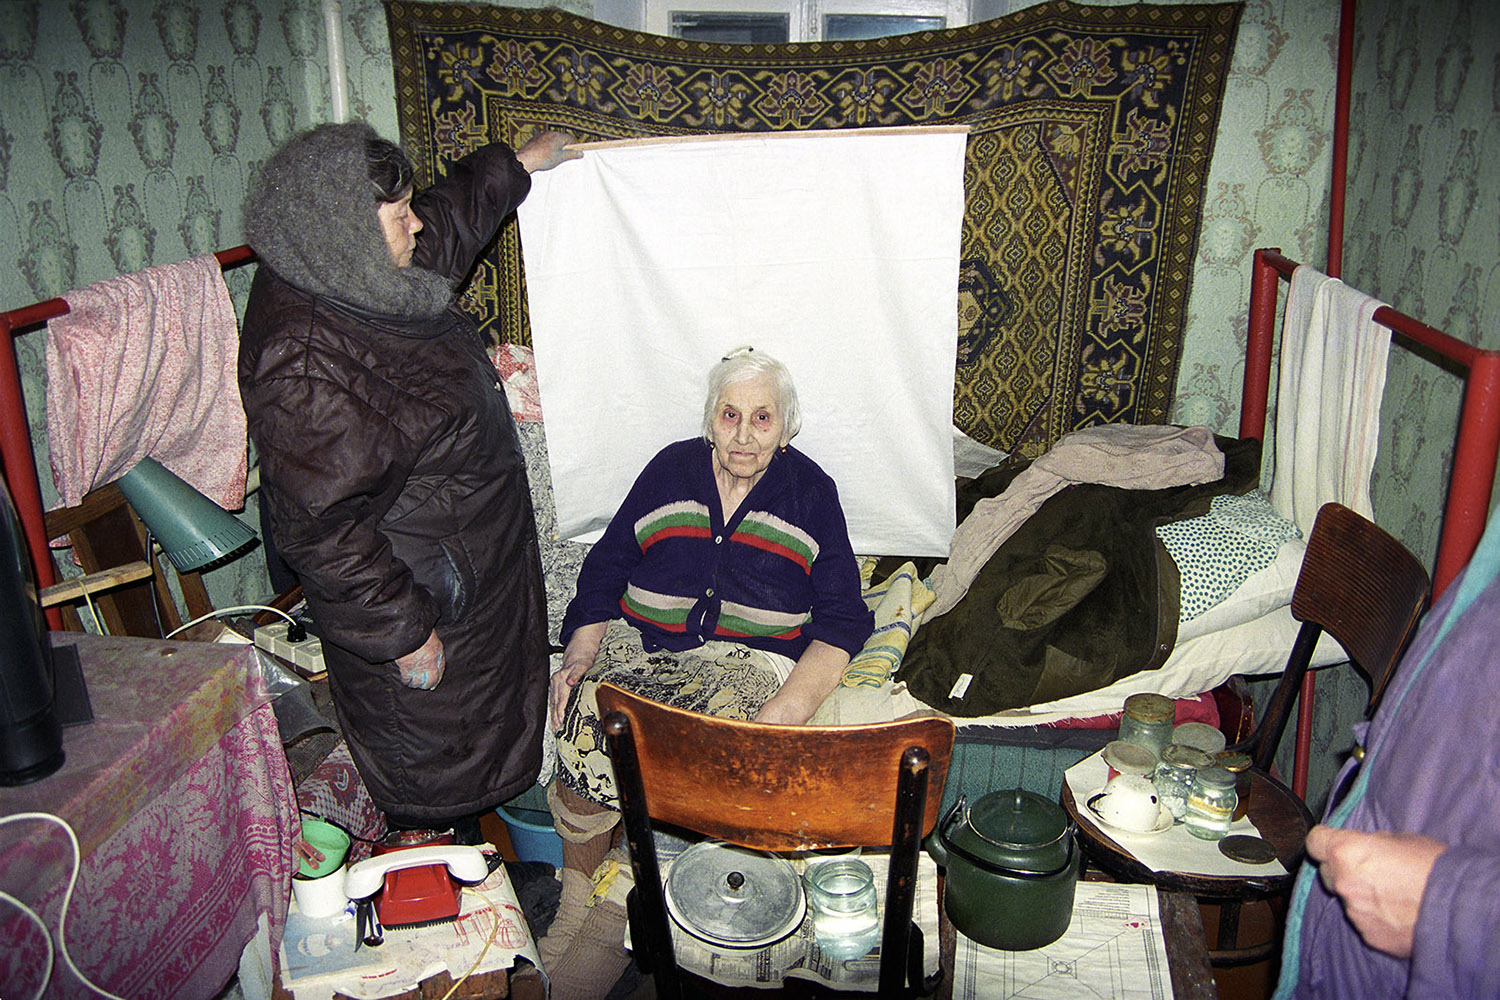 The following series of photographs was taken between 1994 and 1995 in Lugansk City, Ukraine.